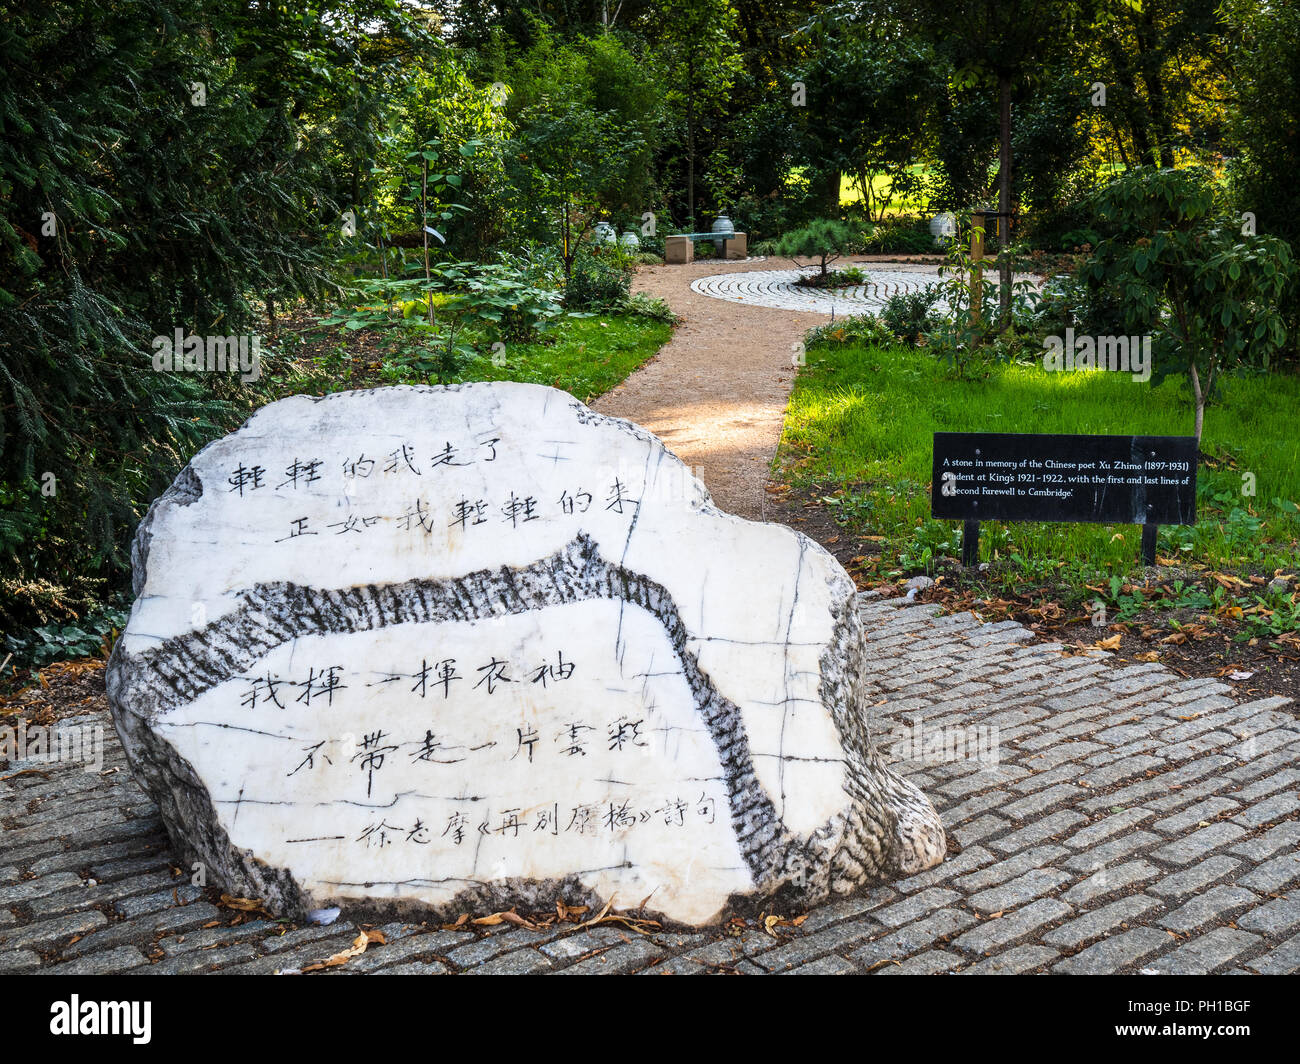 Xu Zhimo Memorial  - monument to the first and last lines of the poem Farewell to Cambridge in the grounds of Kings College, Cambridge University. Stock Photo